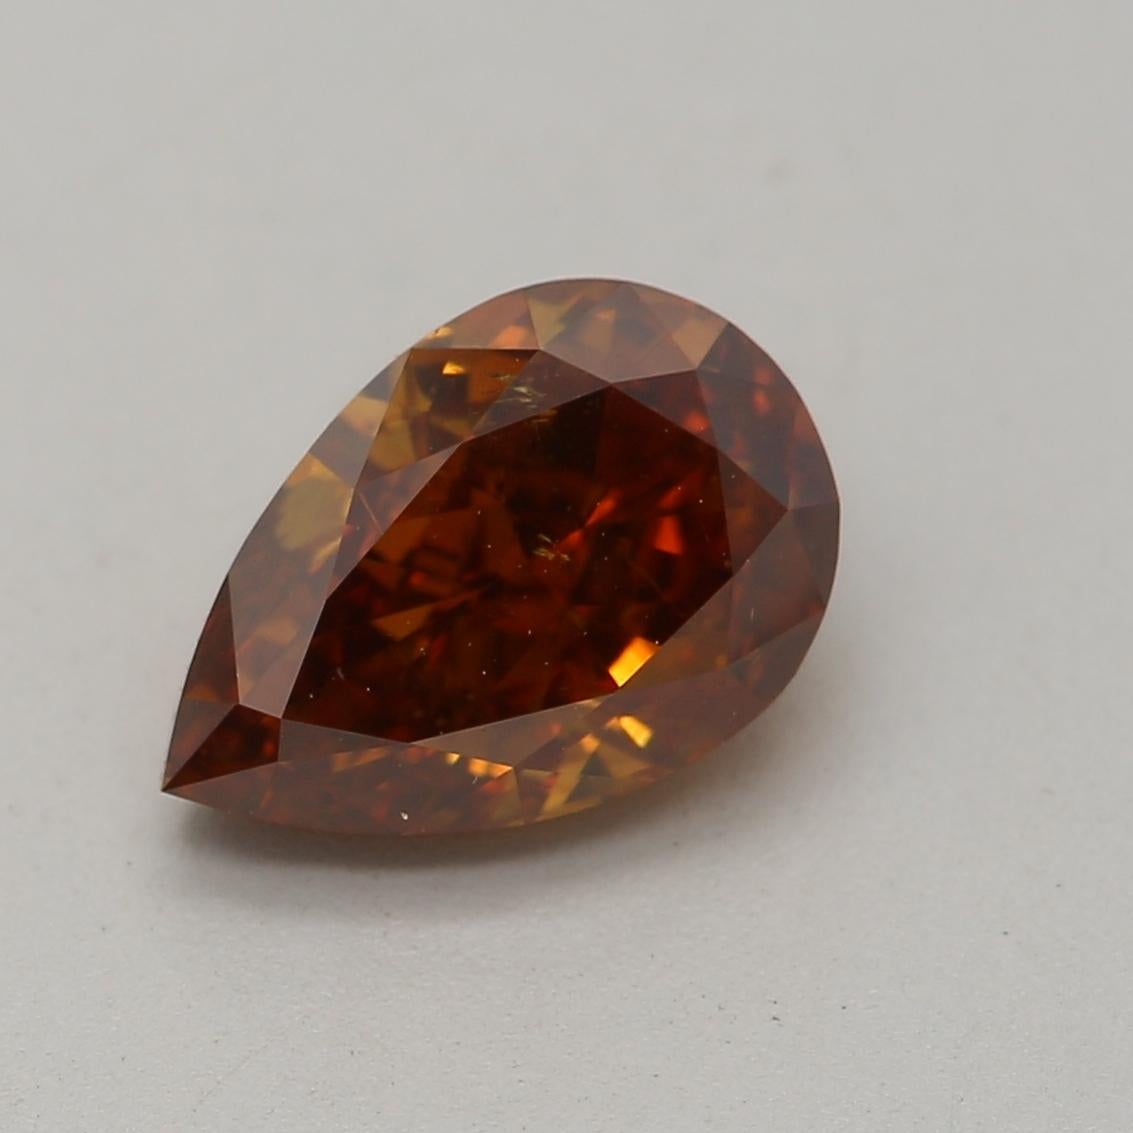 *100% NATURAL FANCY COLOUR DIAMOND*

✪ Diamond Details ✪

➛ Shape: pear
➛ Colour Grade: Fancy Deep Brown Orange
➛ Carat: 1.00
➛ Clarity: I1
➛ GIA Certified 

^FEATURES OF THE DIAMOND^

This 1 carat diamond refers to the weight of the diamond, not